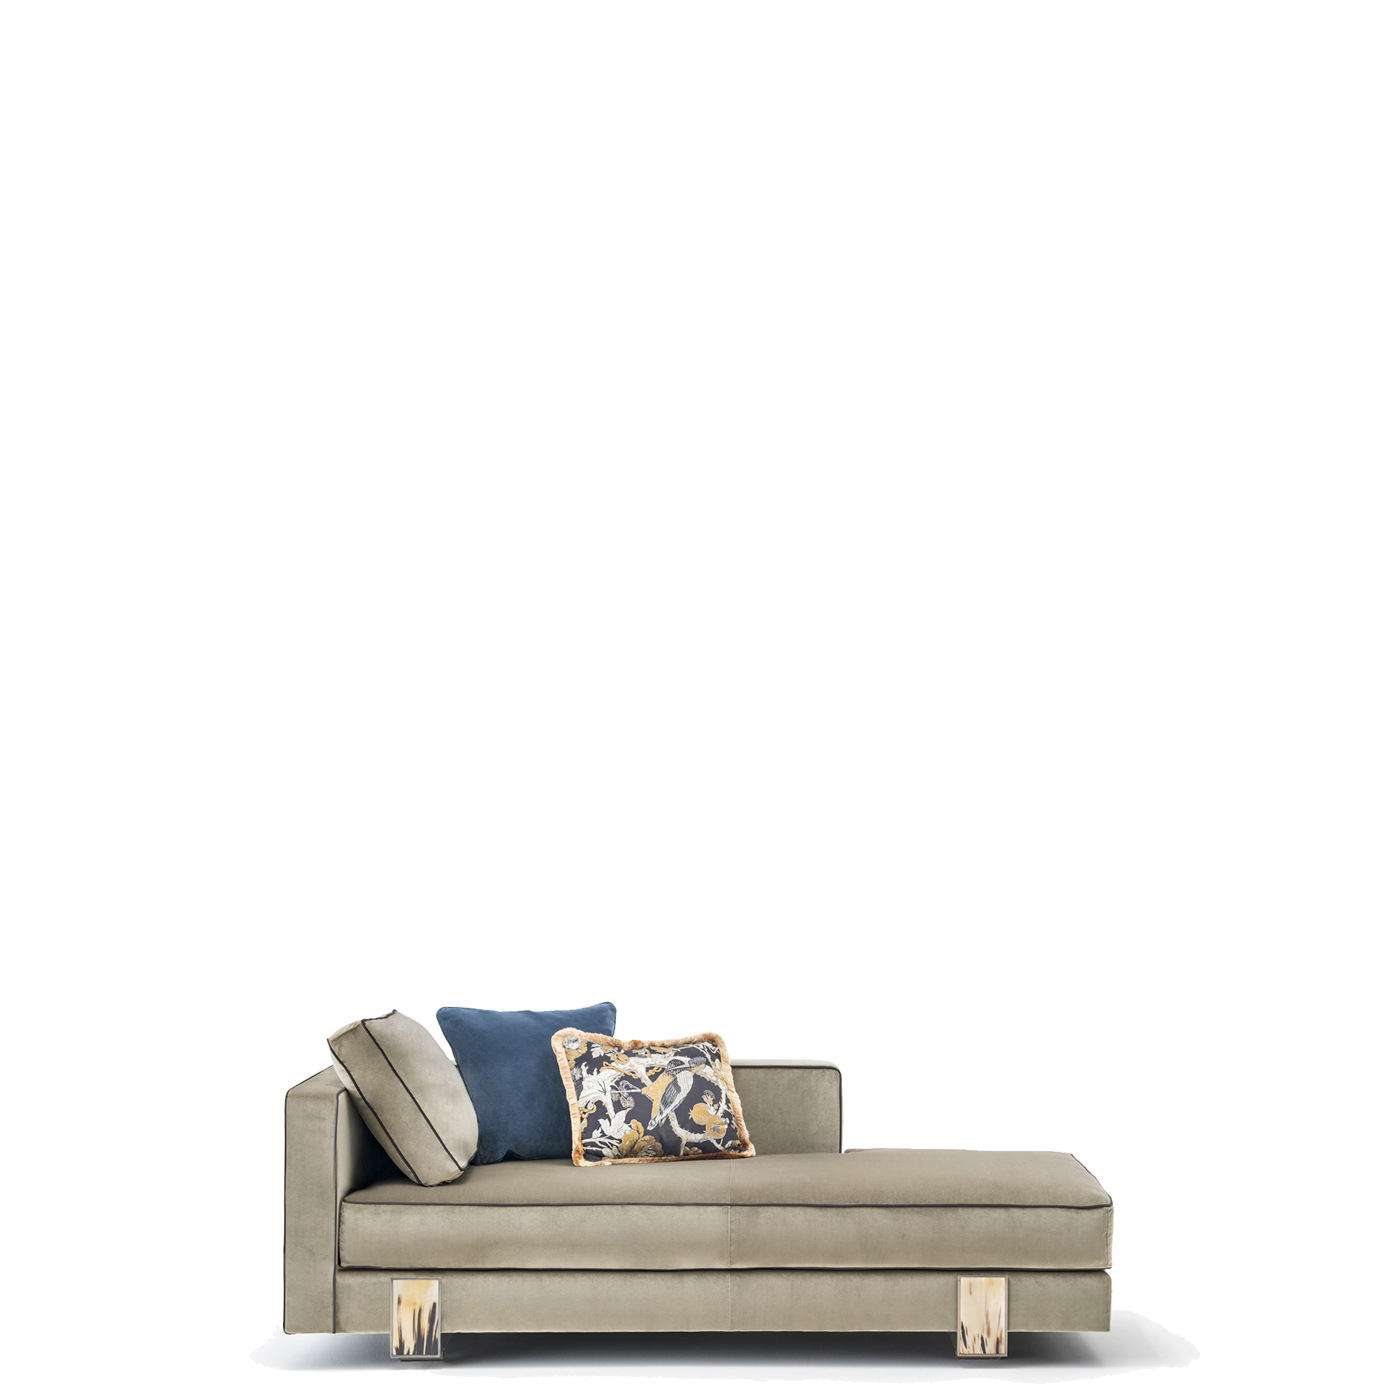 Sofas and seats - Adriano chaise longue in Lario velvet with horn details 6038D - Arcahorn